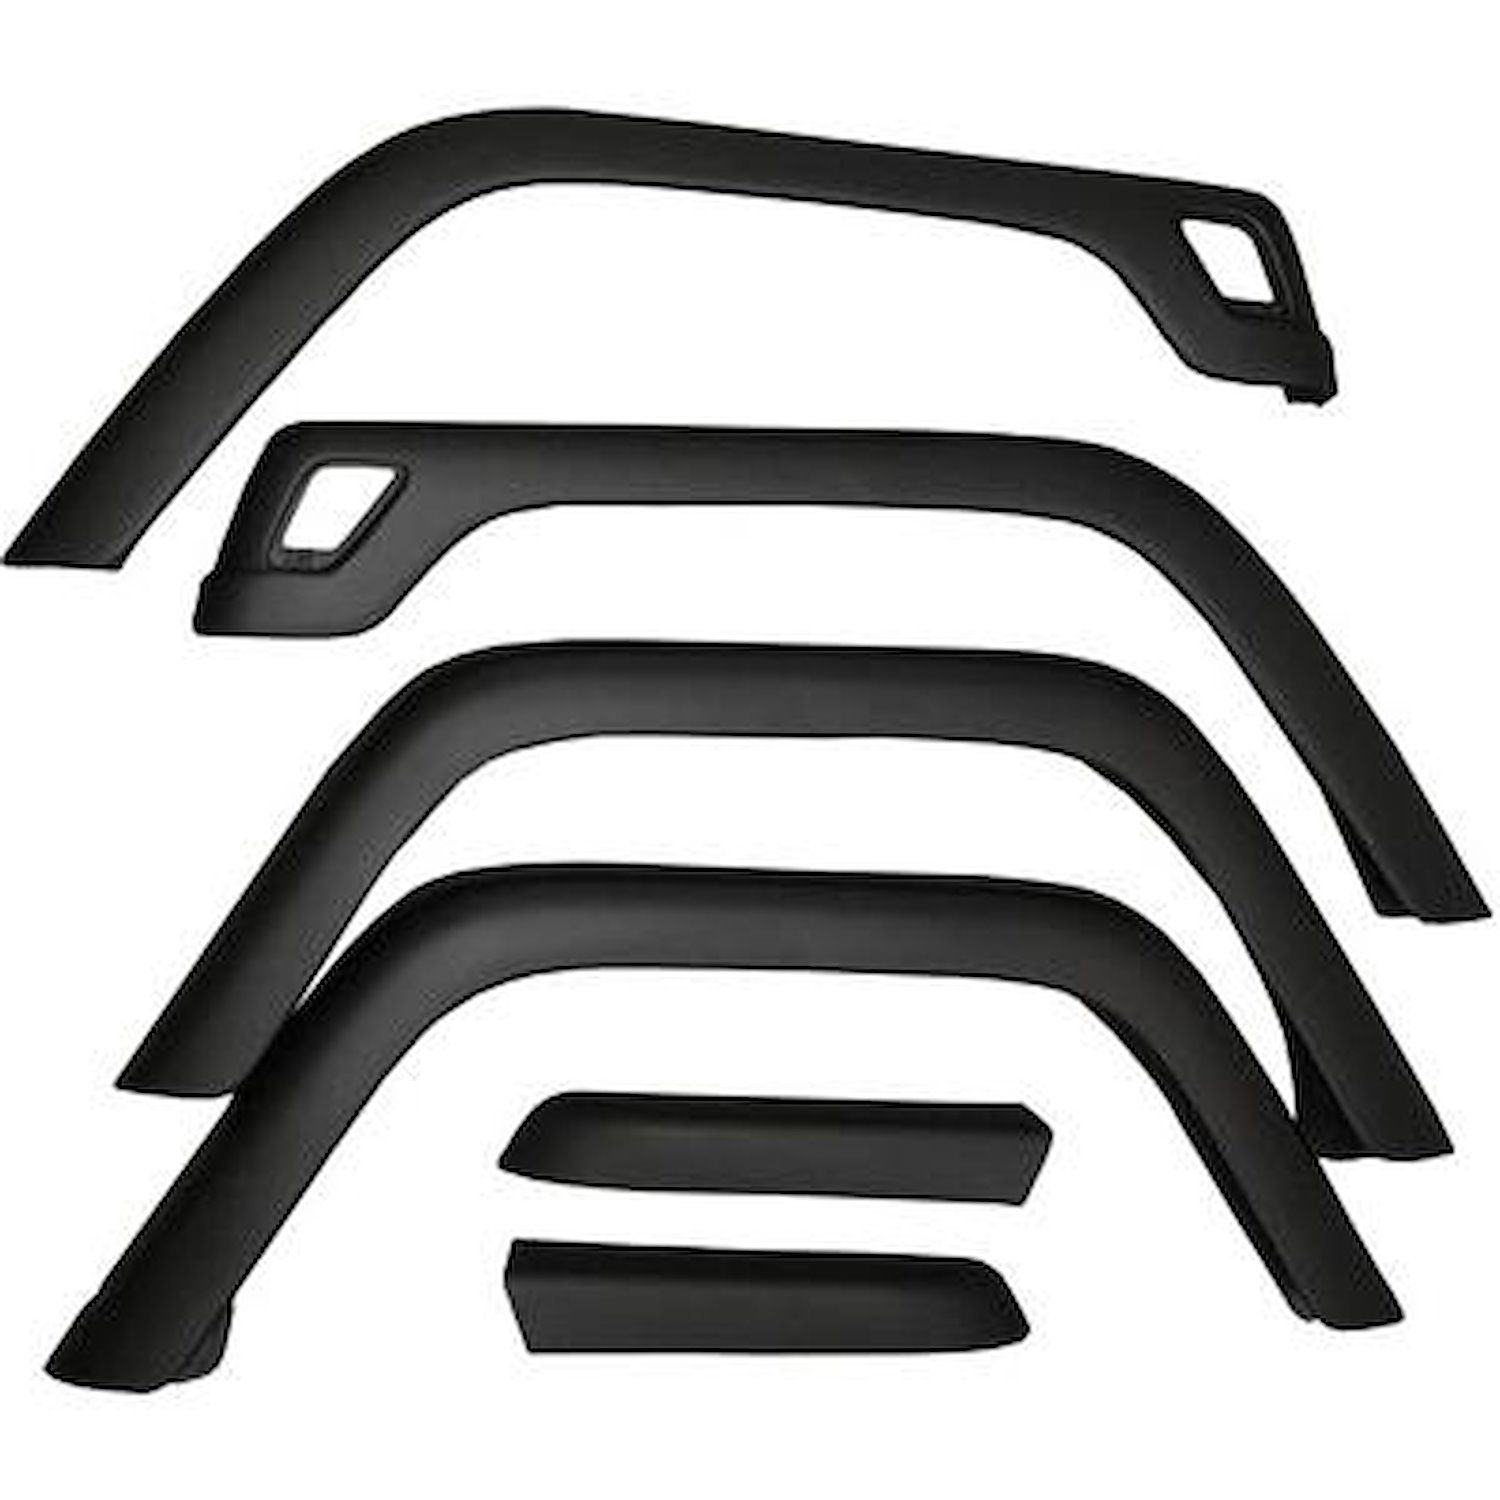 OE Style Fender Flare Kit for 1997-2006 Jeep TJ Wrangler and 2004-2006 Jeep LJ Wrangler Unlimited [6-Piece]